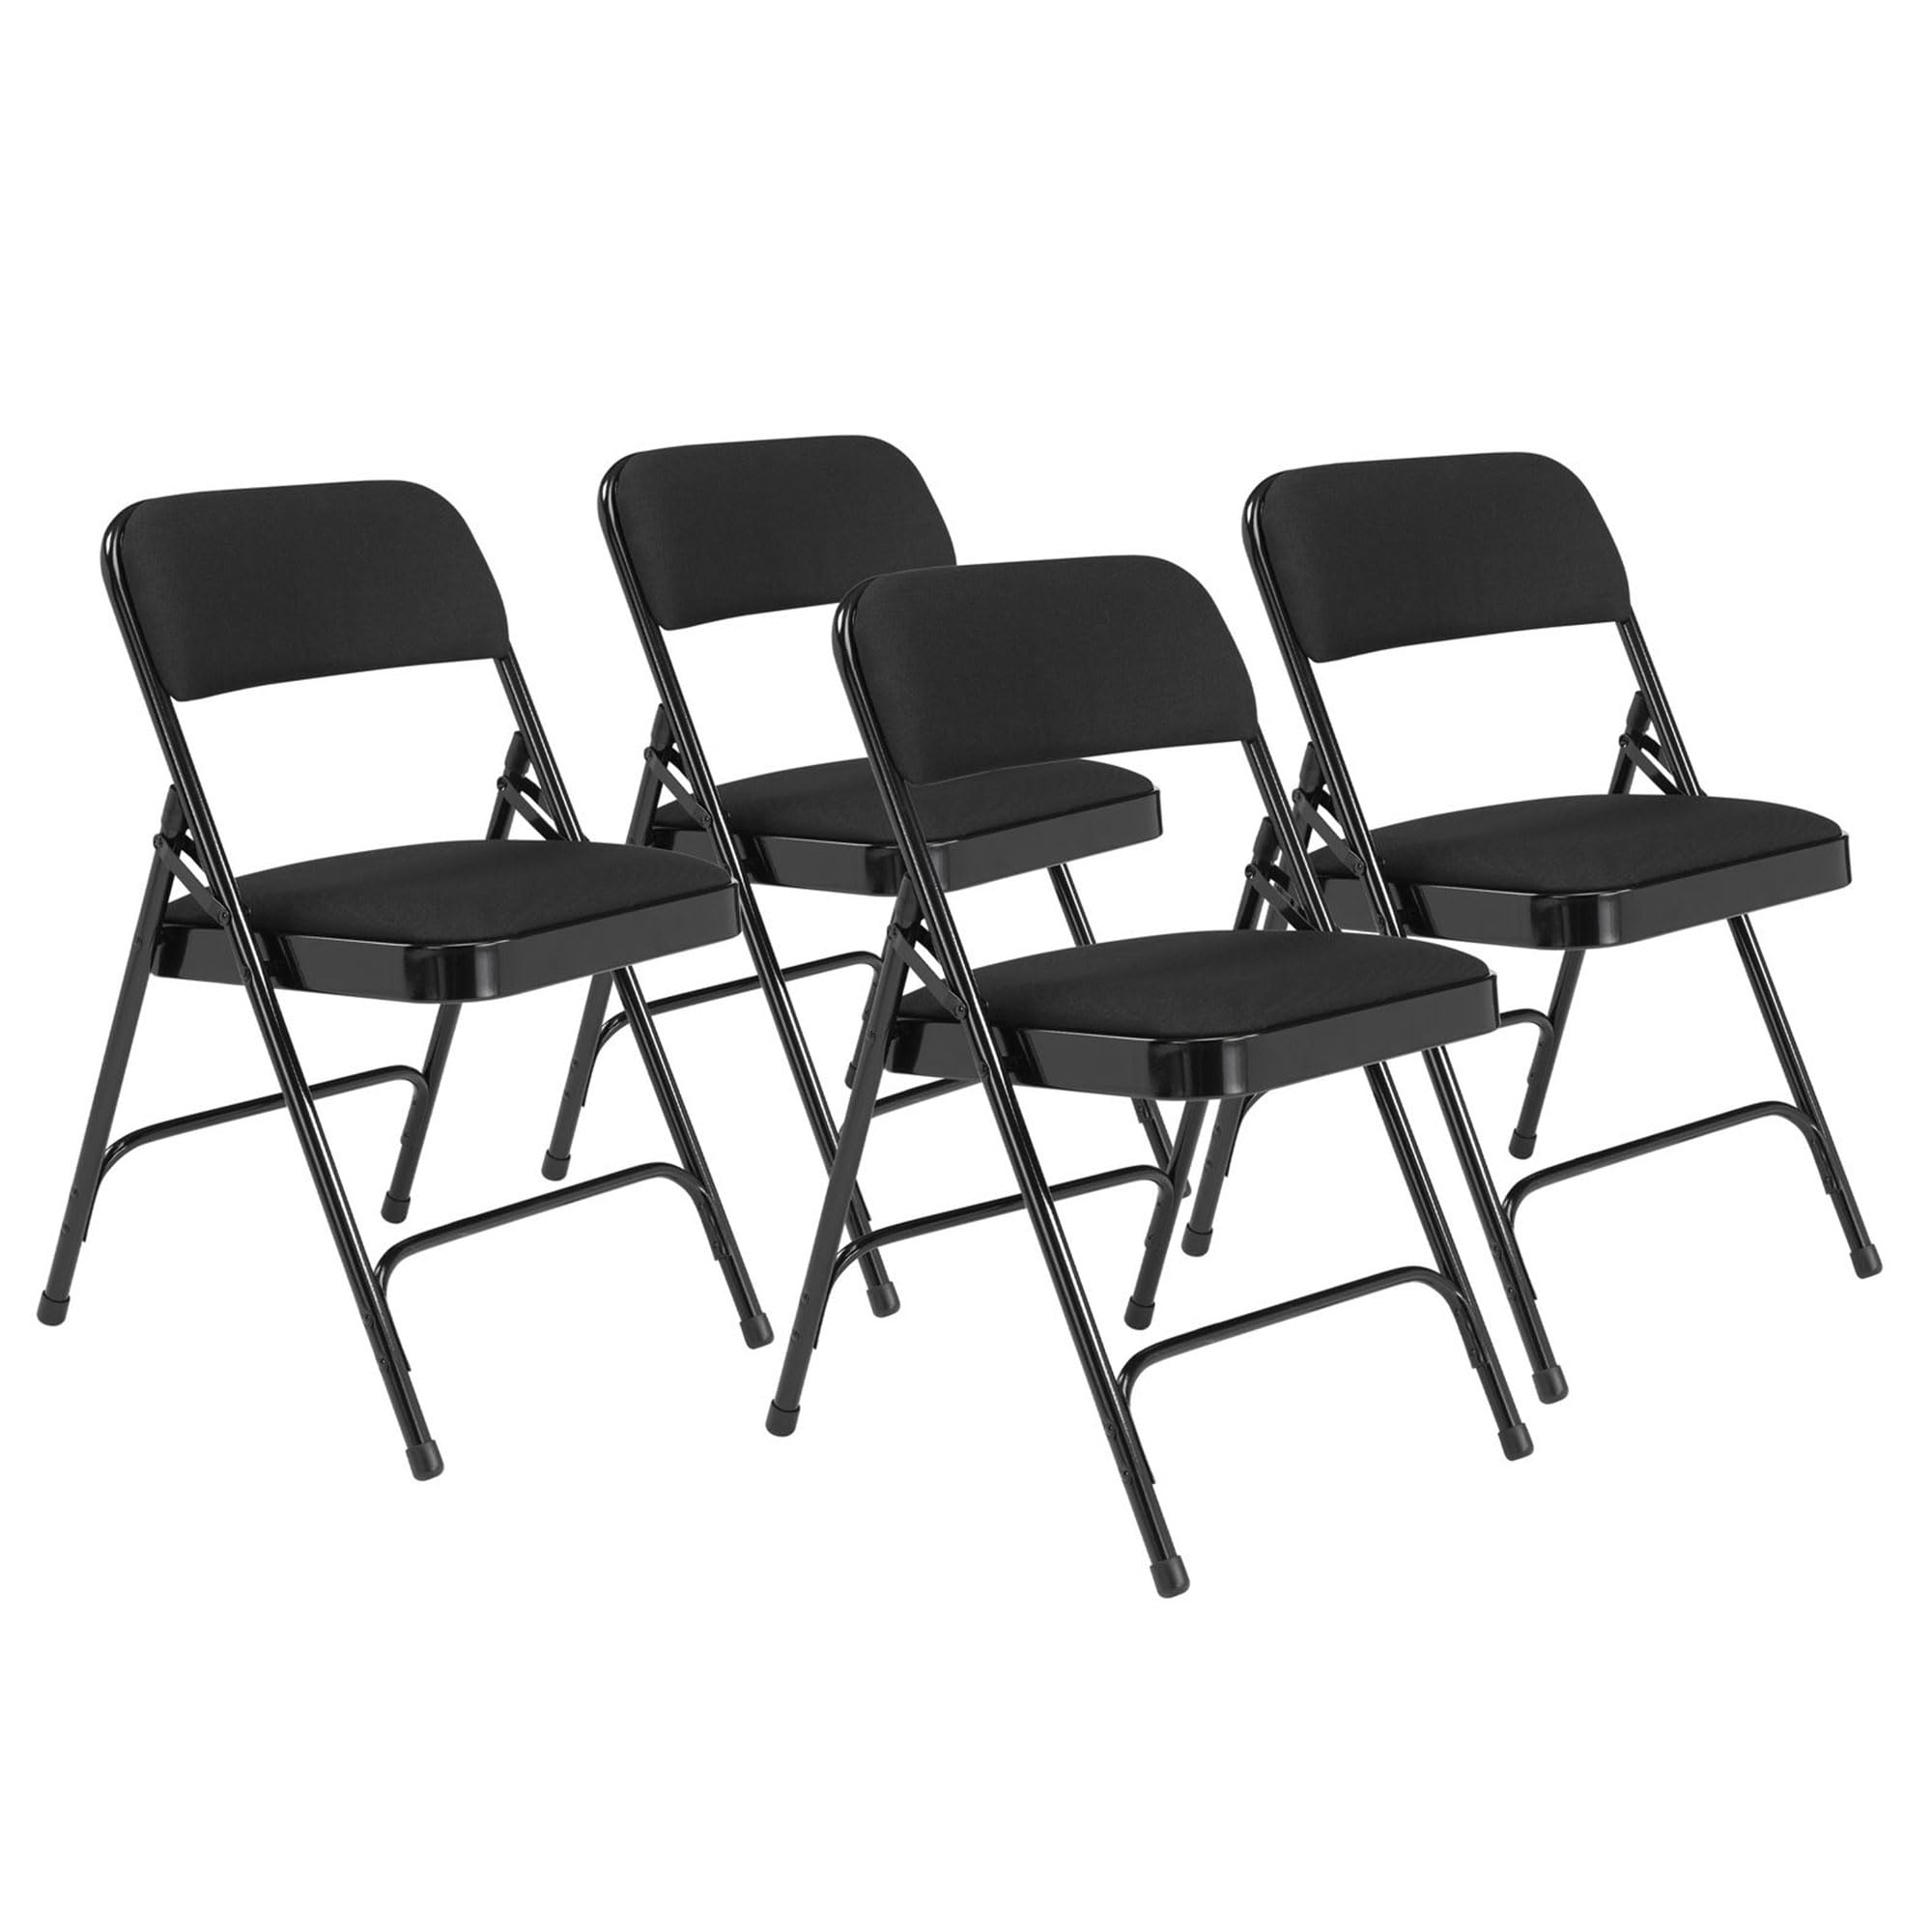 National Public Seating 2200 Series Deluxe Fabric Upholstered 2" Cushion Double Hinge Indoor Outdoor Dining/Office Folding Chair, Black, 4 Pack